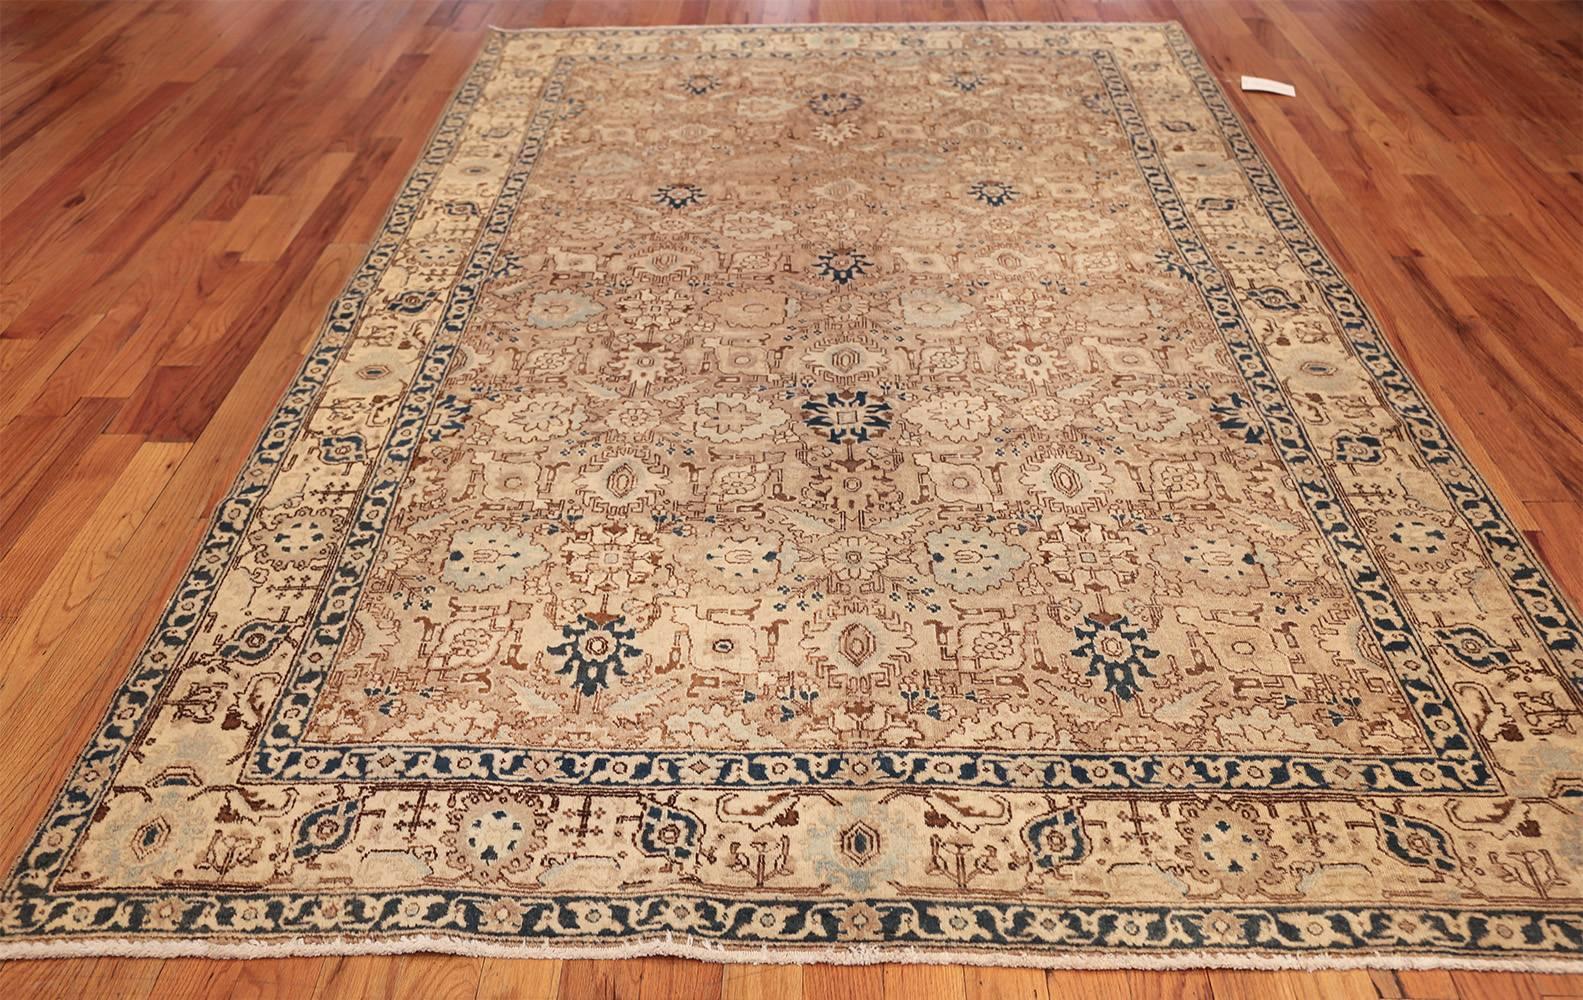 Decorative Neutral Antique Room Size Persian Tabriz Rug. Size: 6 ft 4 in x 10 ft 9